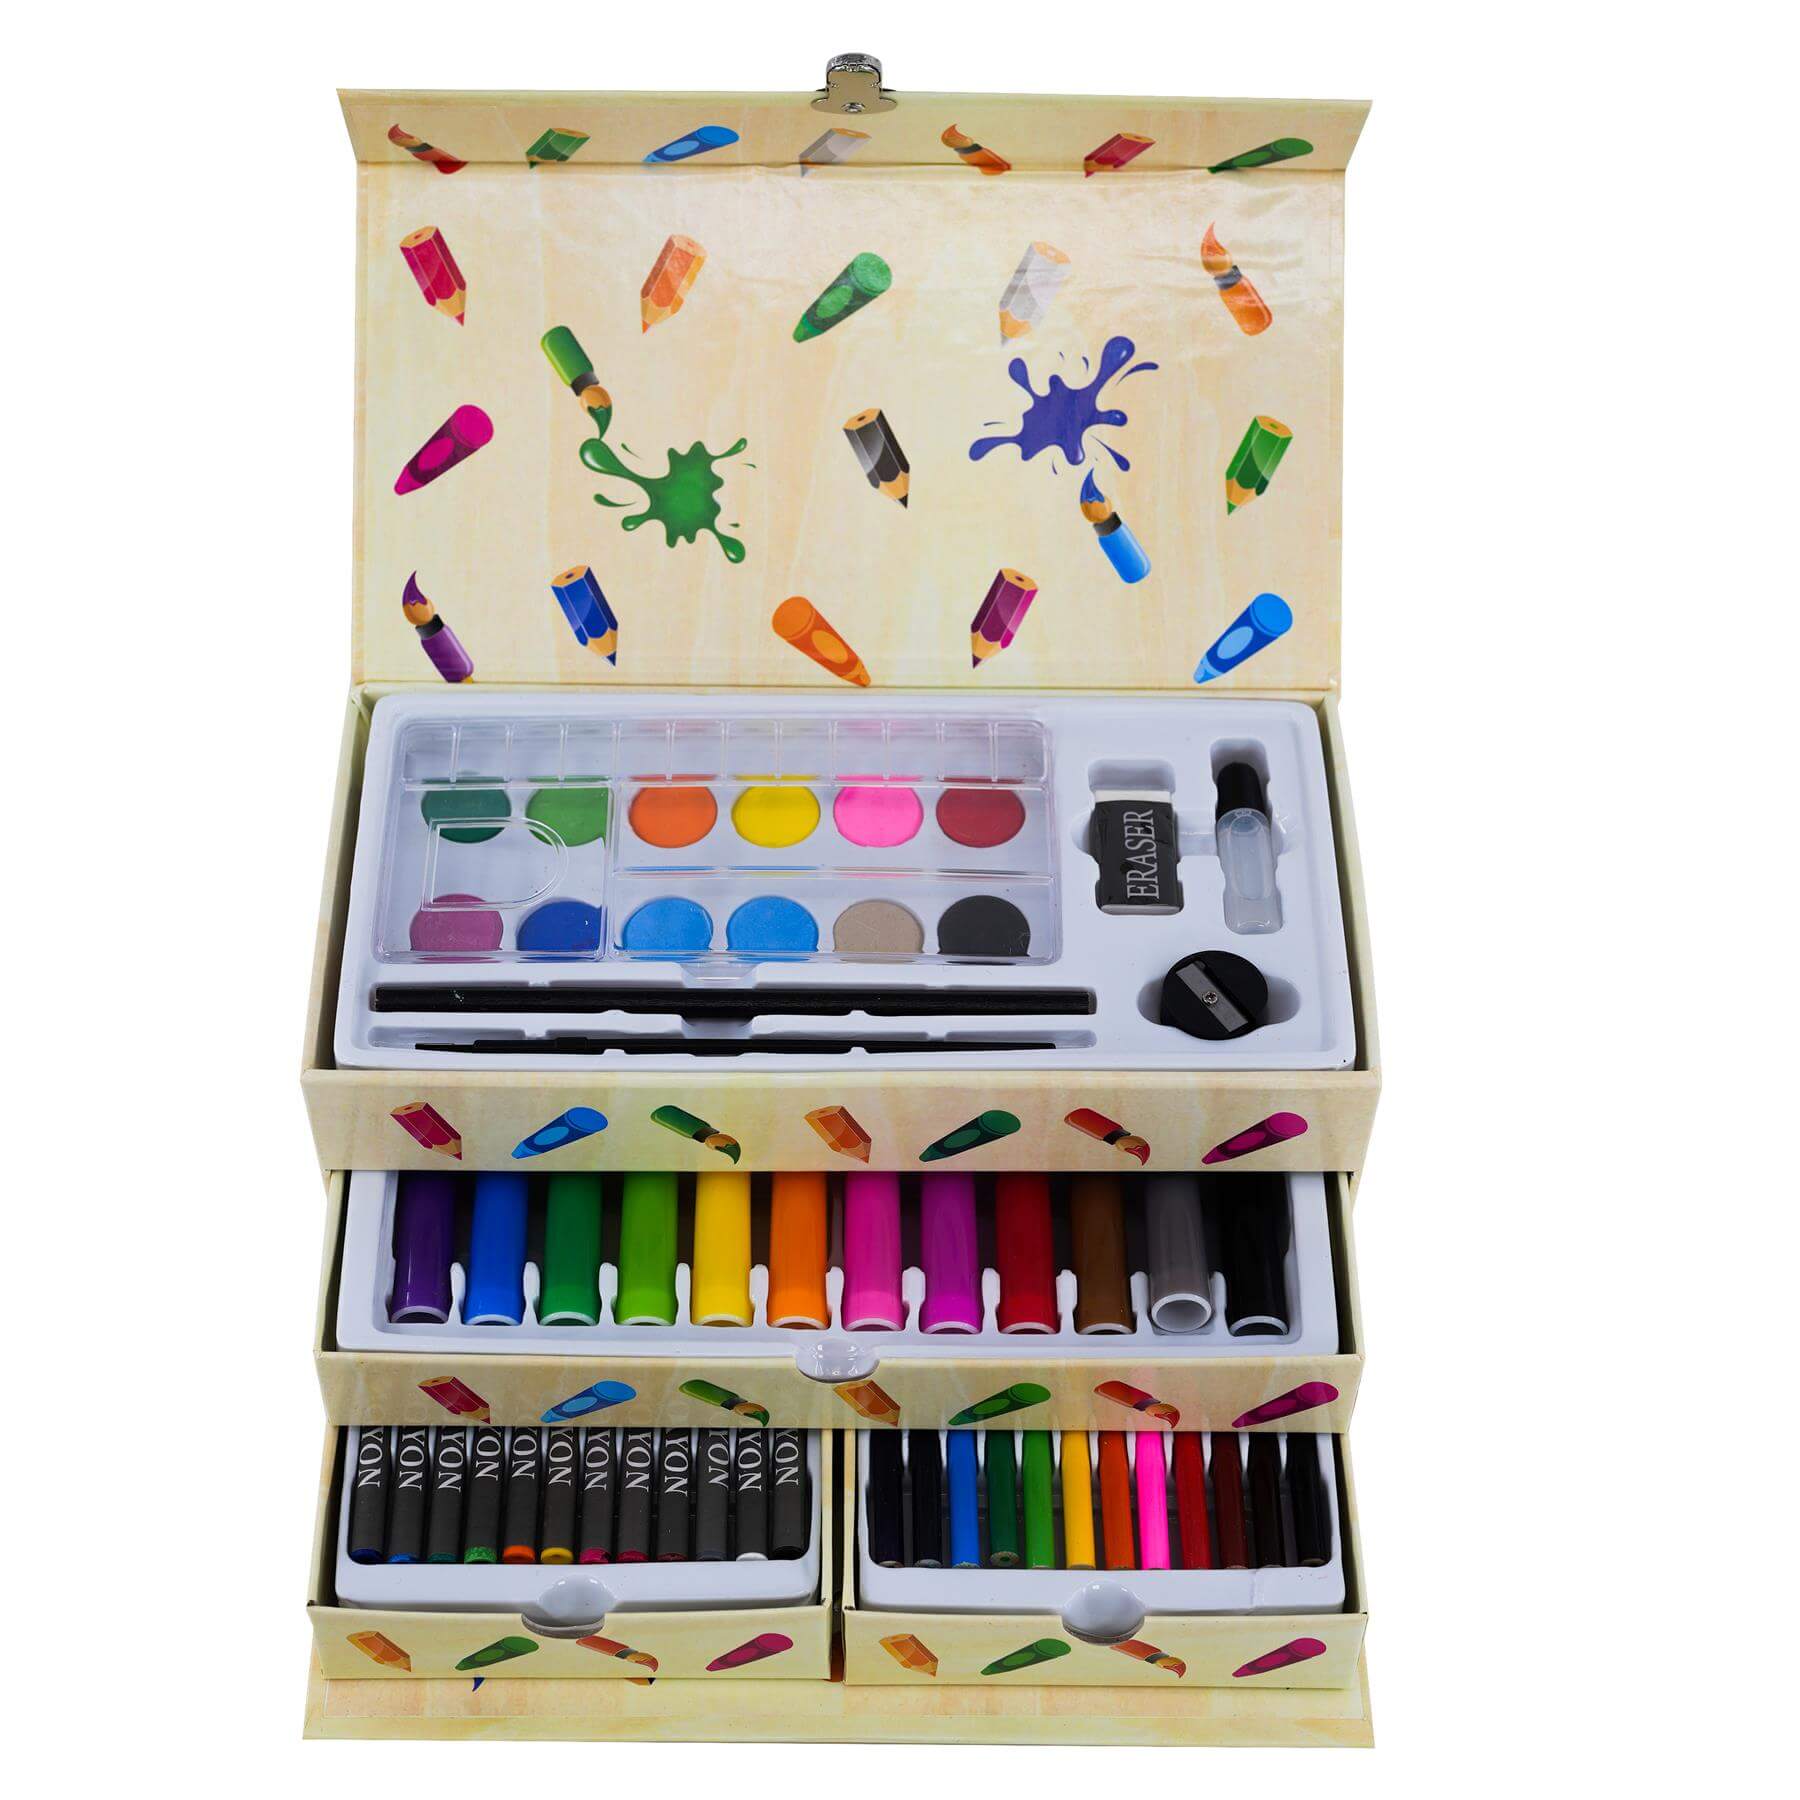 54 Pieces Craft Art Set in A Box The Magic Toy Shop - The Magic Toy Shop